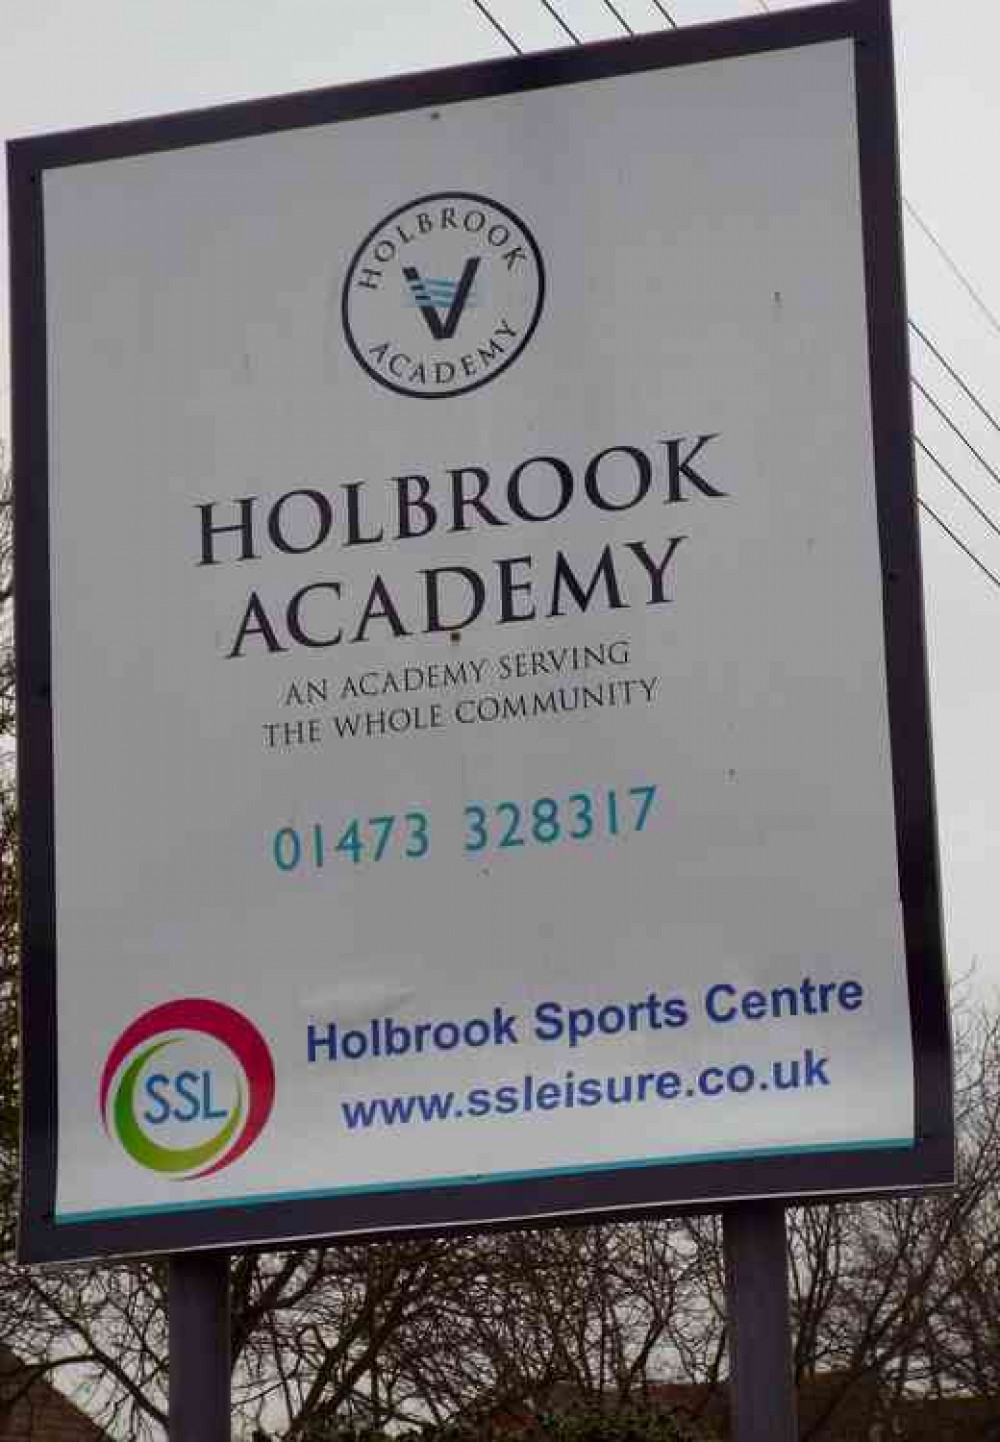 Holbrook academy in partial closure this morning